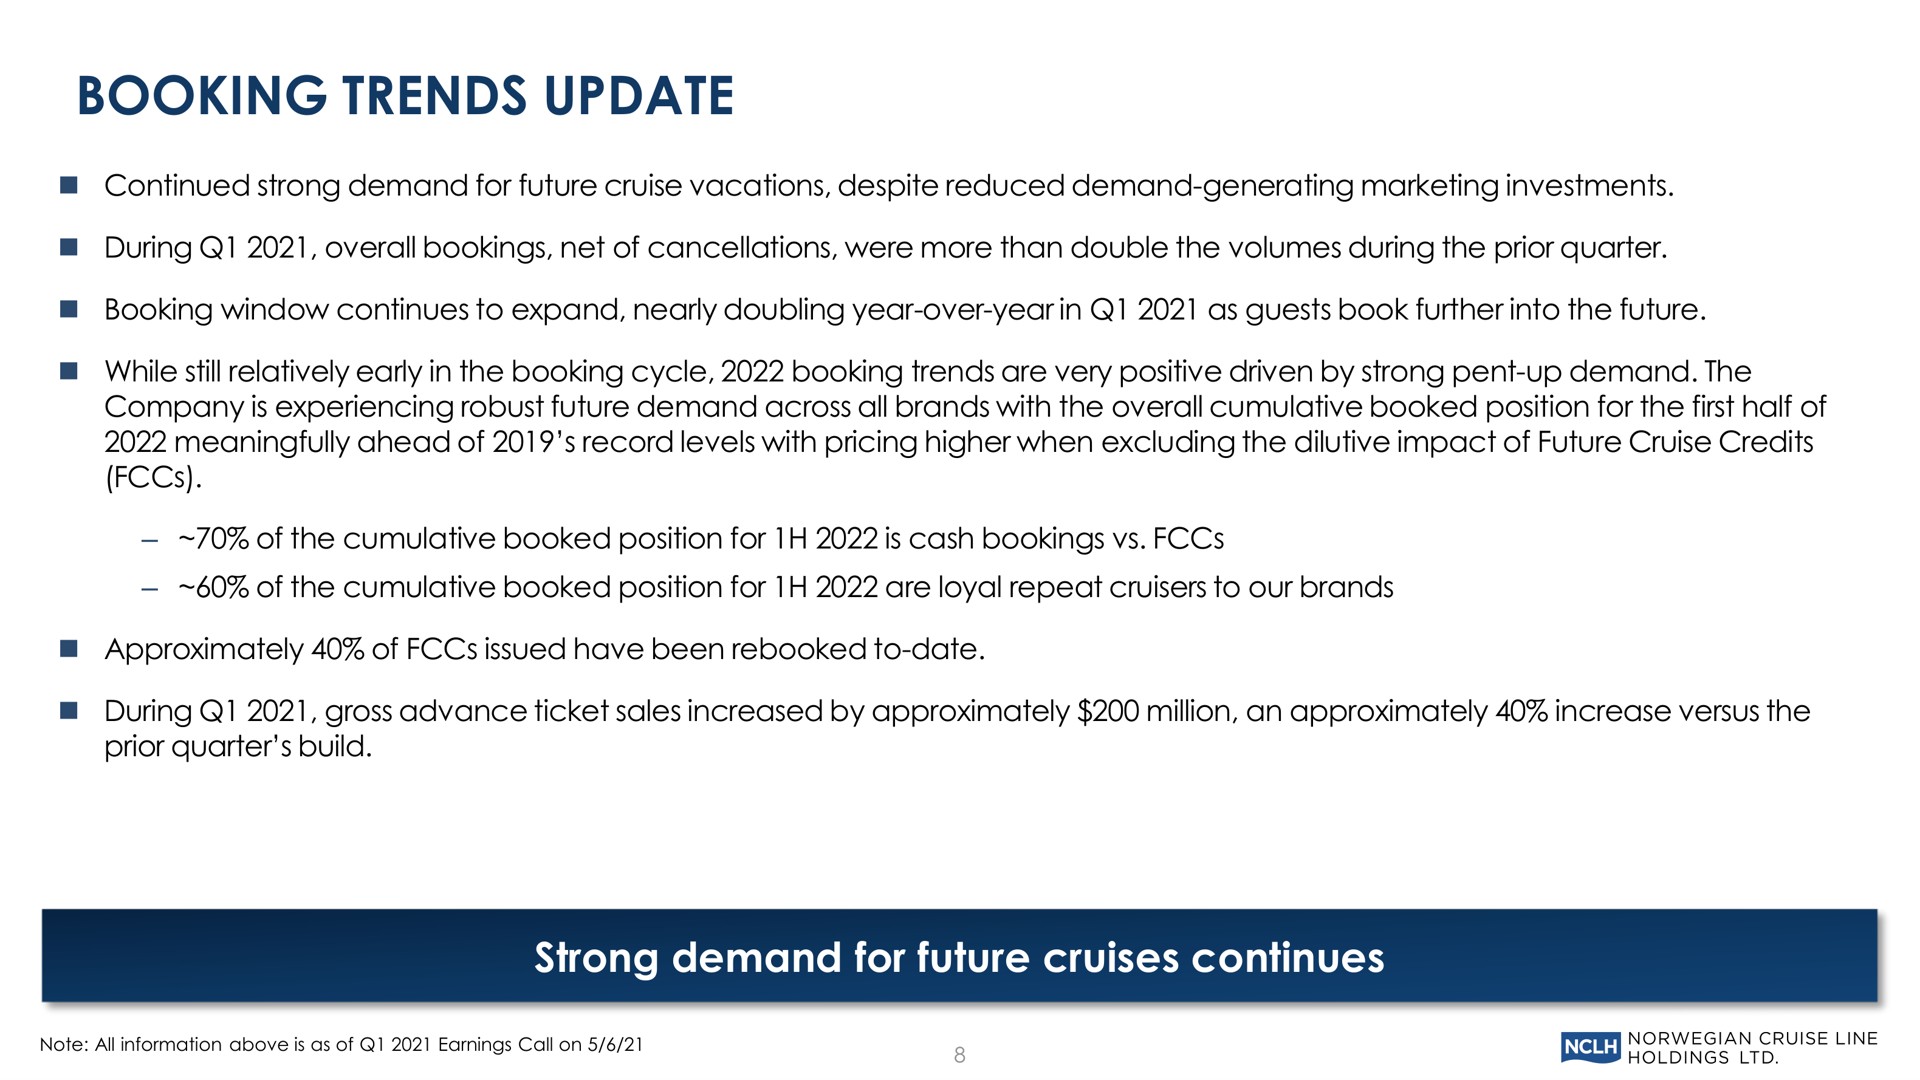 booking trends update strong demand for future cruises continues | Norwegian Cruise Line